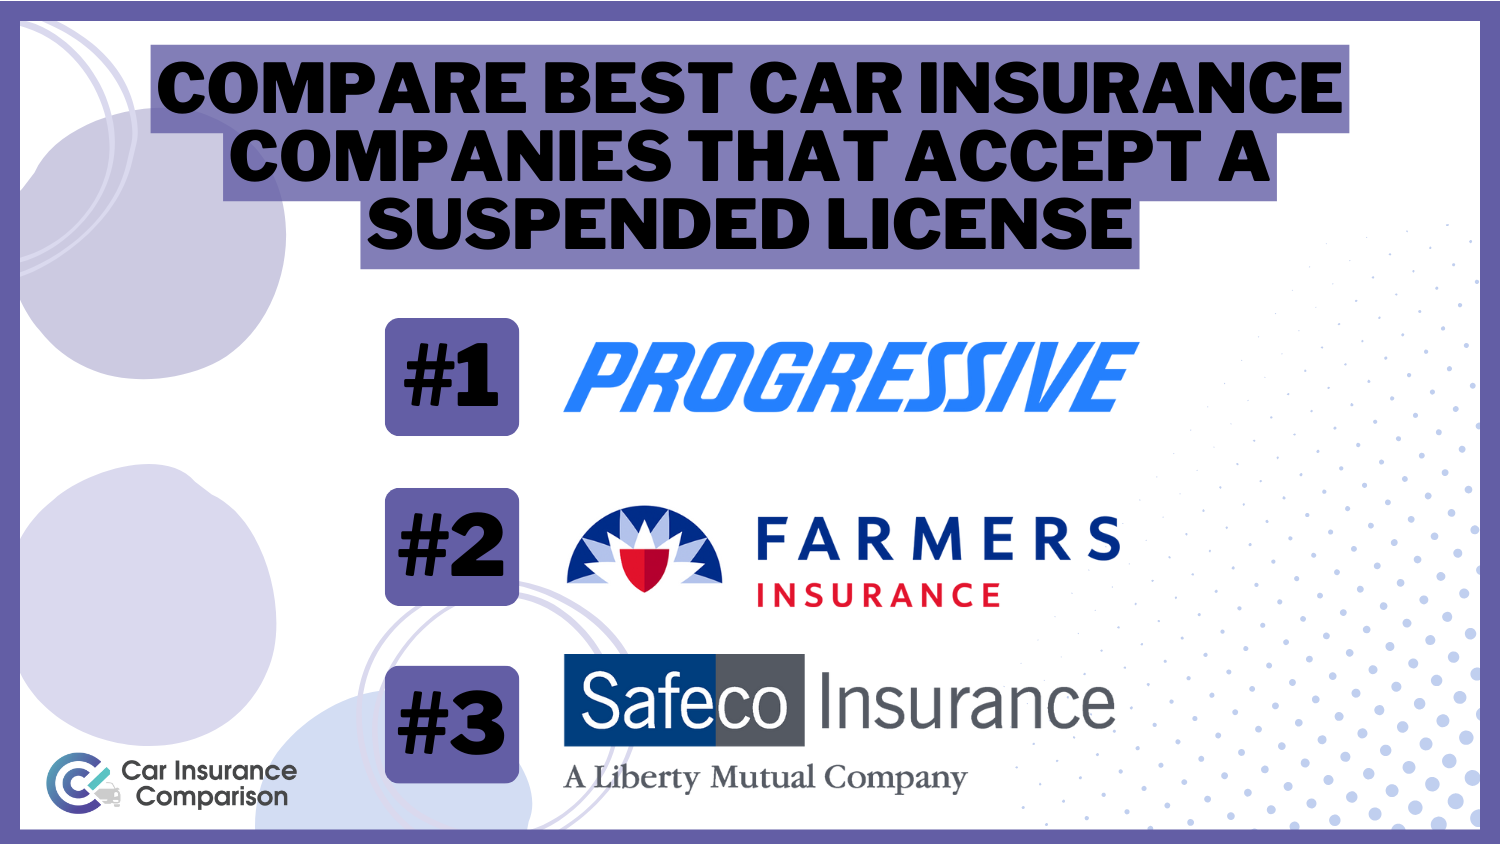 Compare Best Car Insurance Companies That Accept a Suspended License: Progressive, Farmers and Safeco